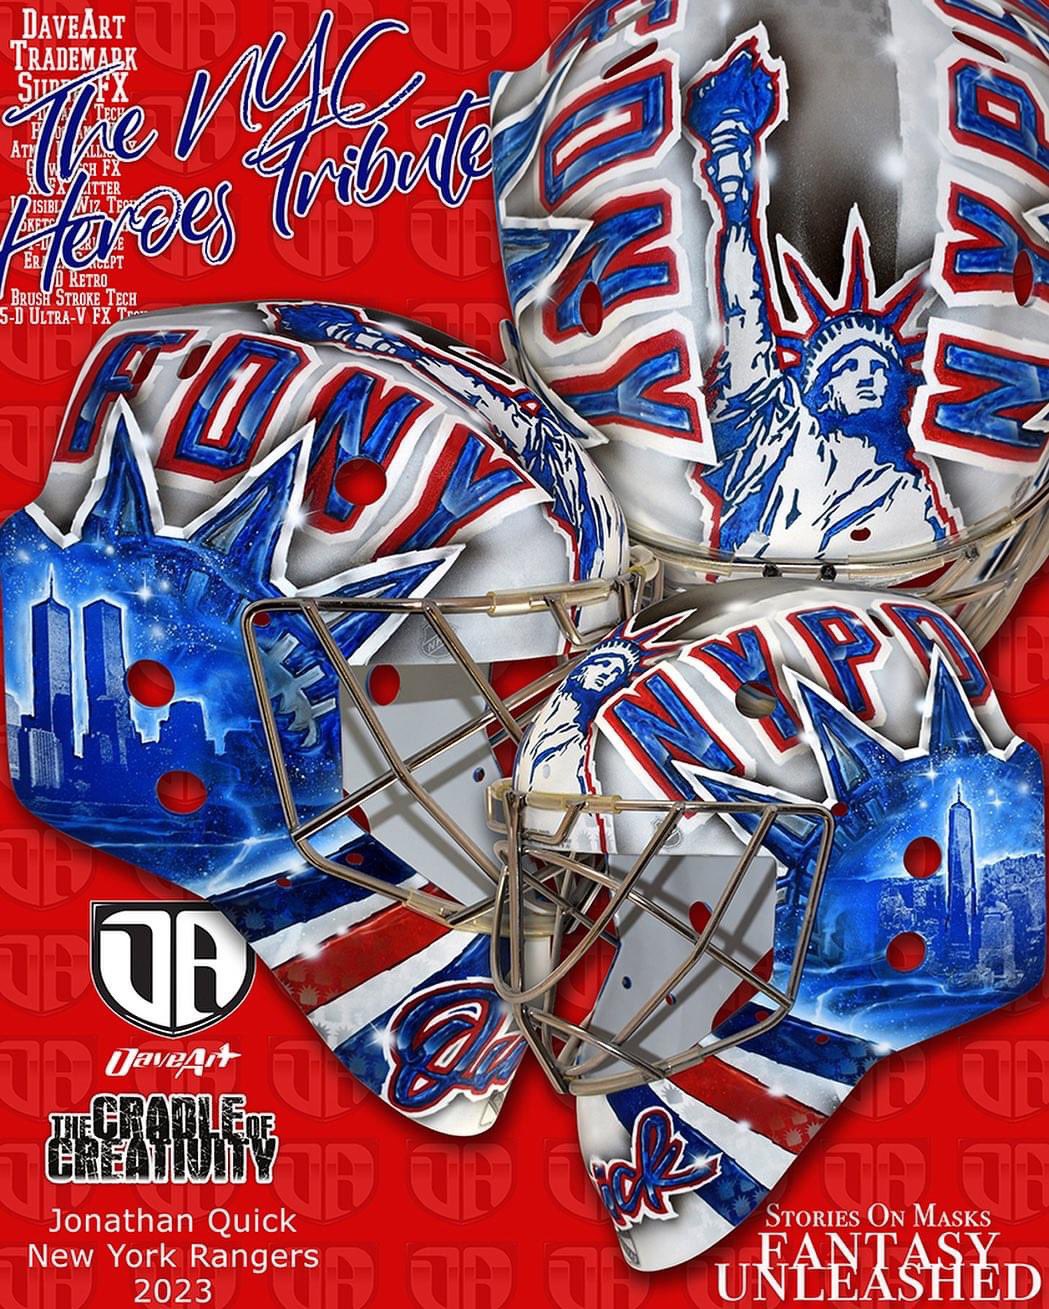 UBS Arena Hosts 48th Annual FDNY vs NYPD Hockey Game - Drive4Five